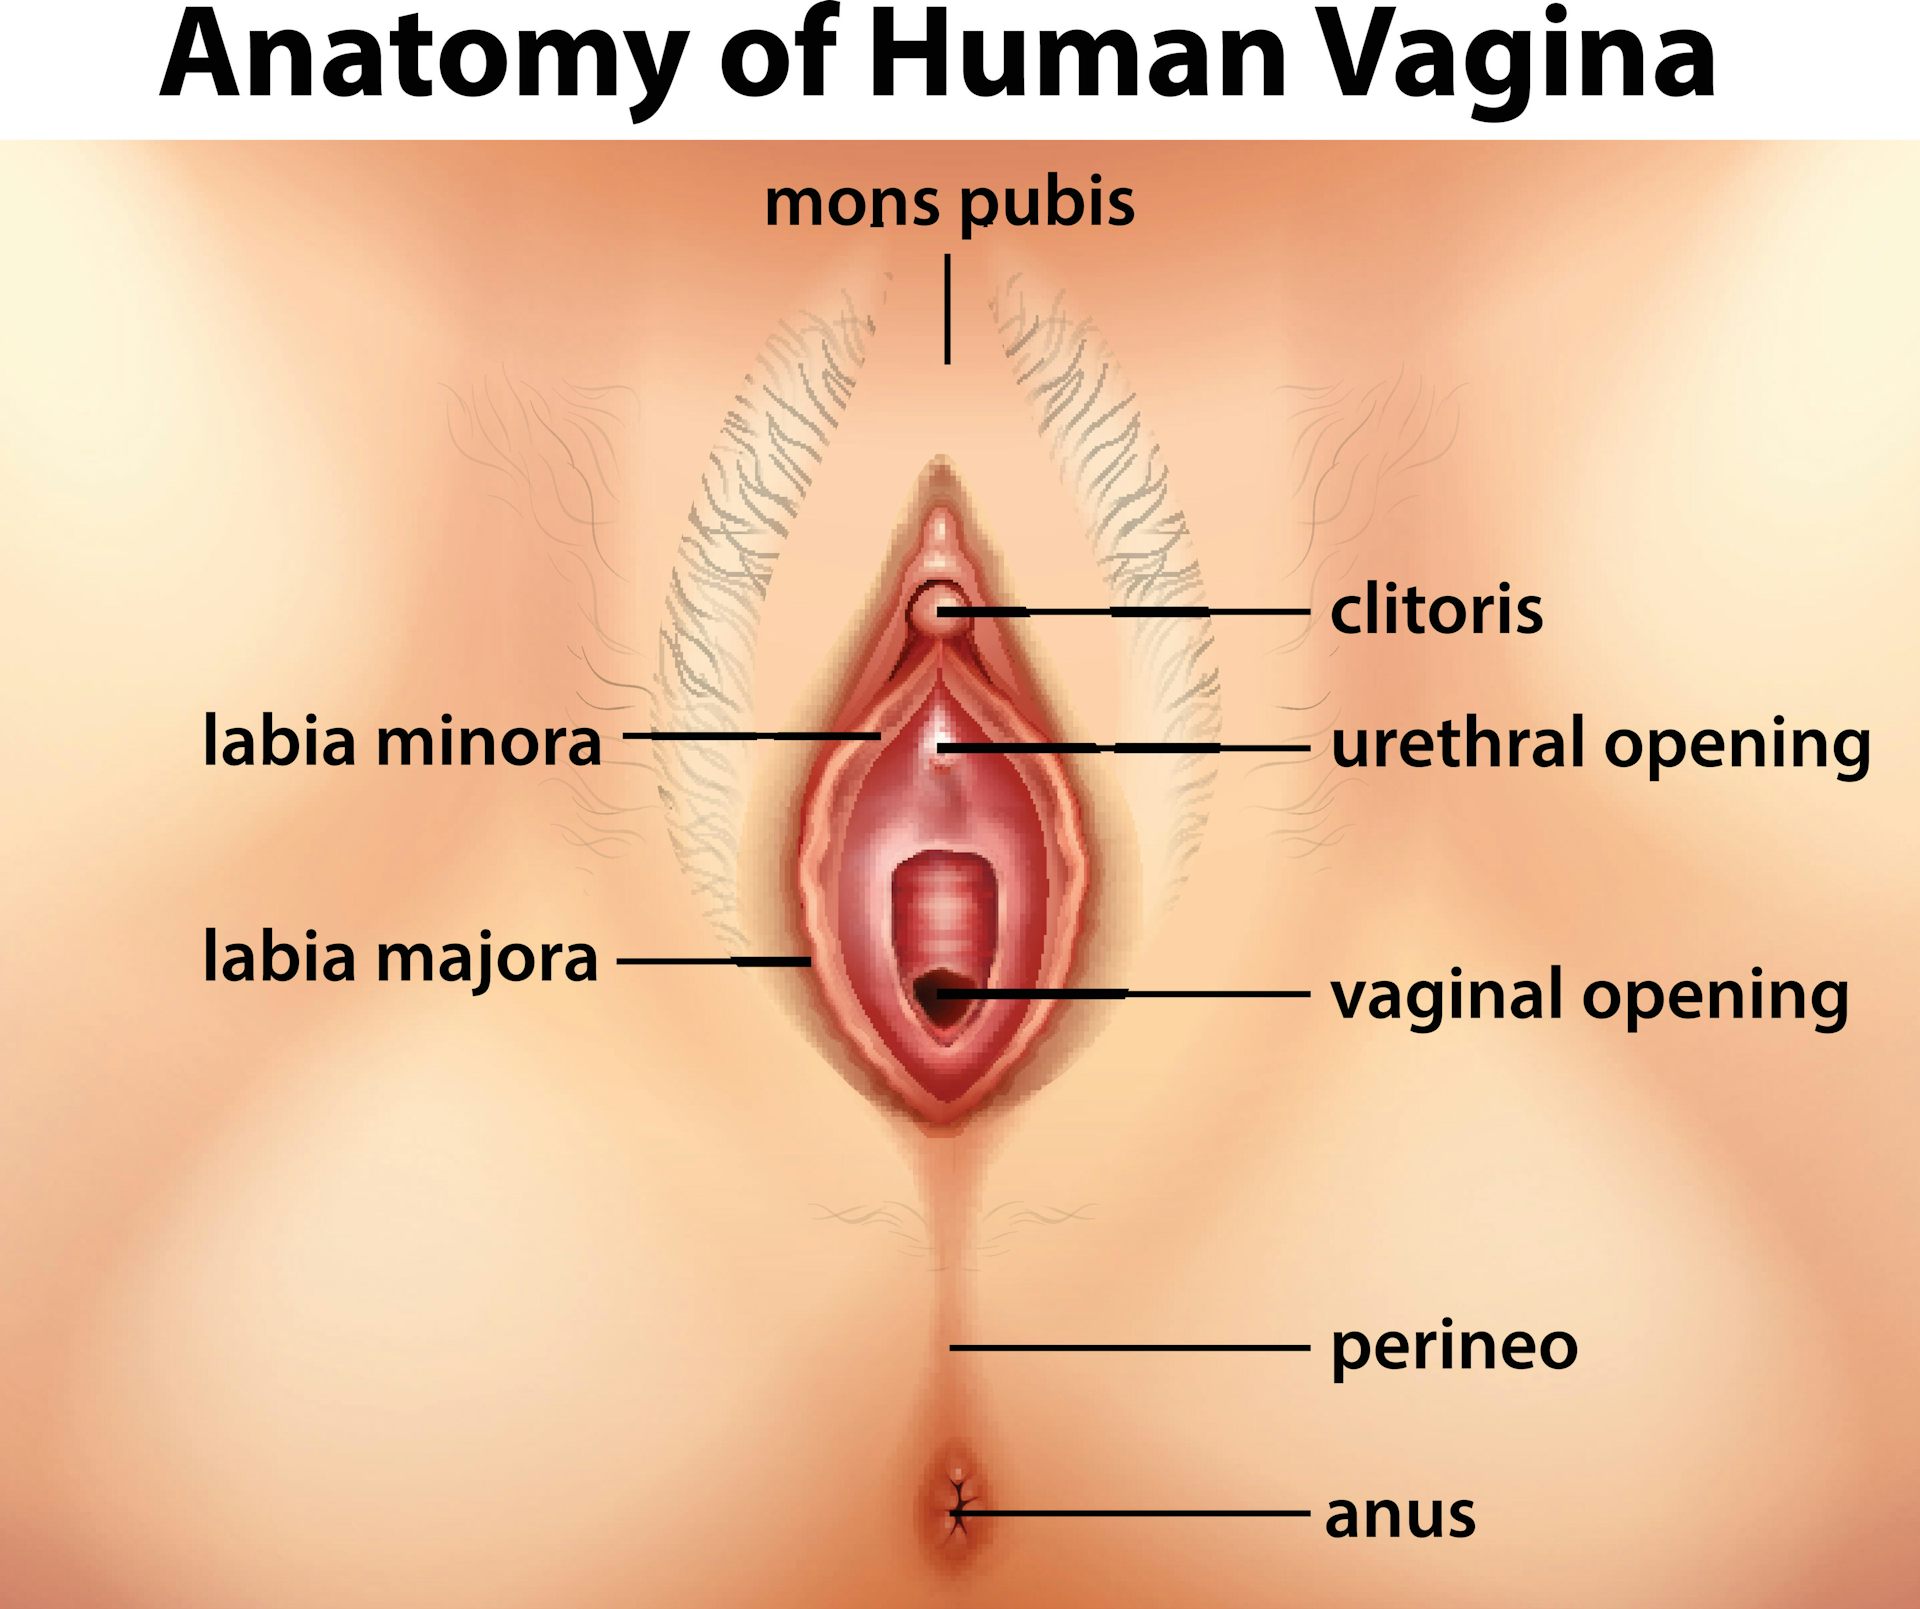 curtis beckmann recommends Images Of Vaginas